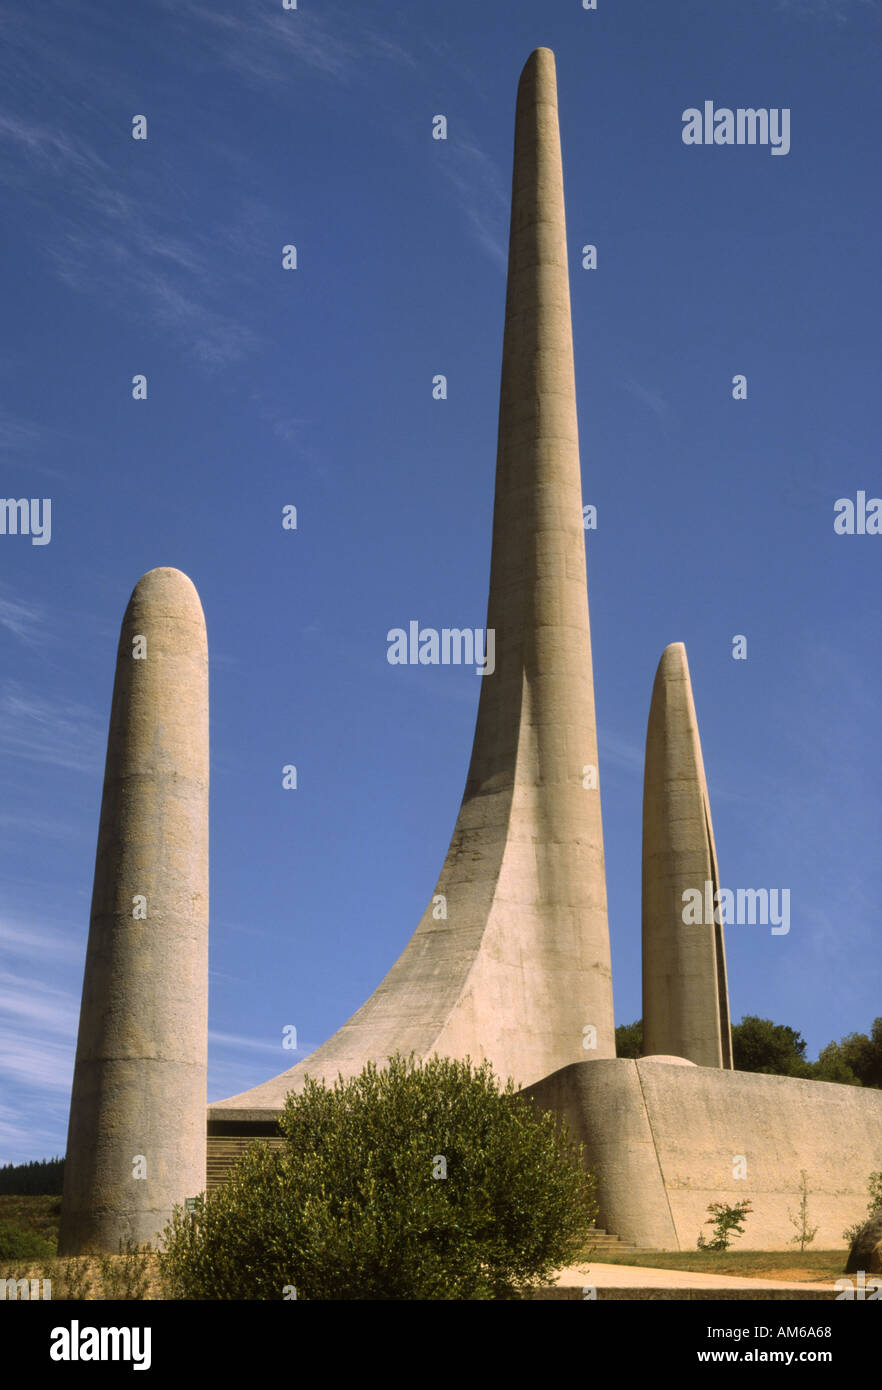 South Africa Paarl Afrikaans language monument Stock Photo